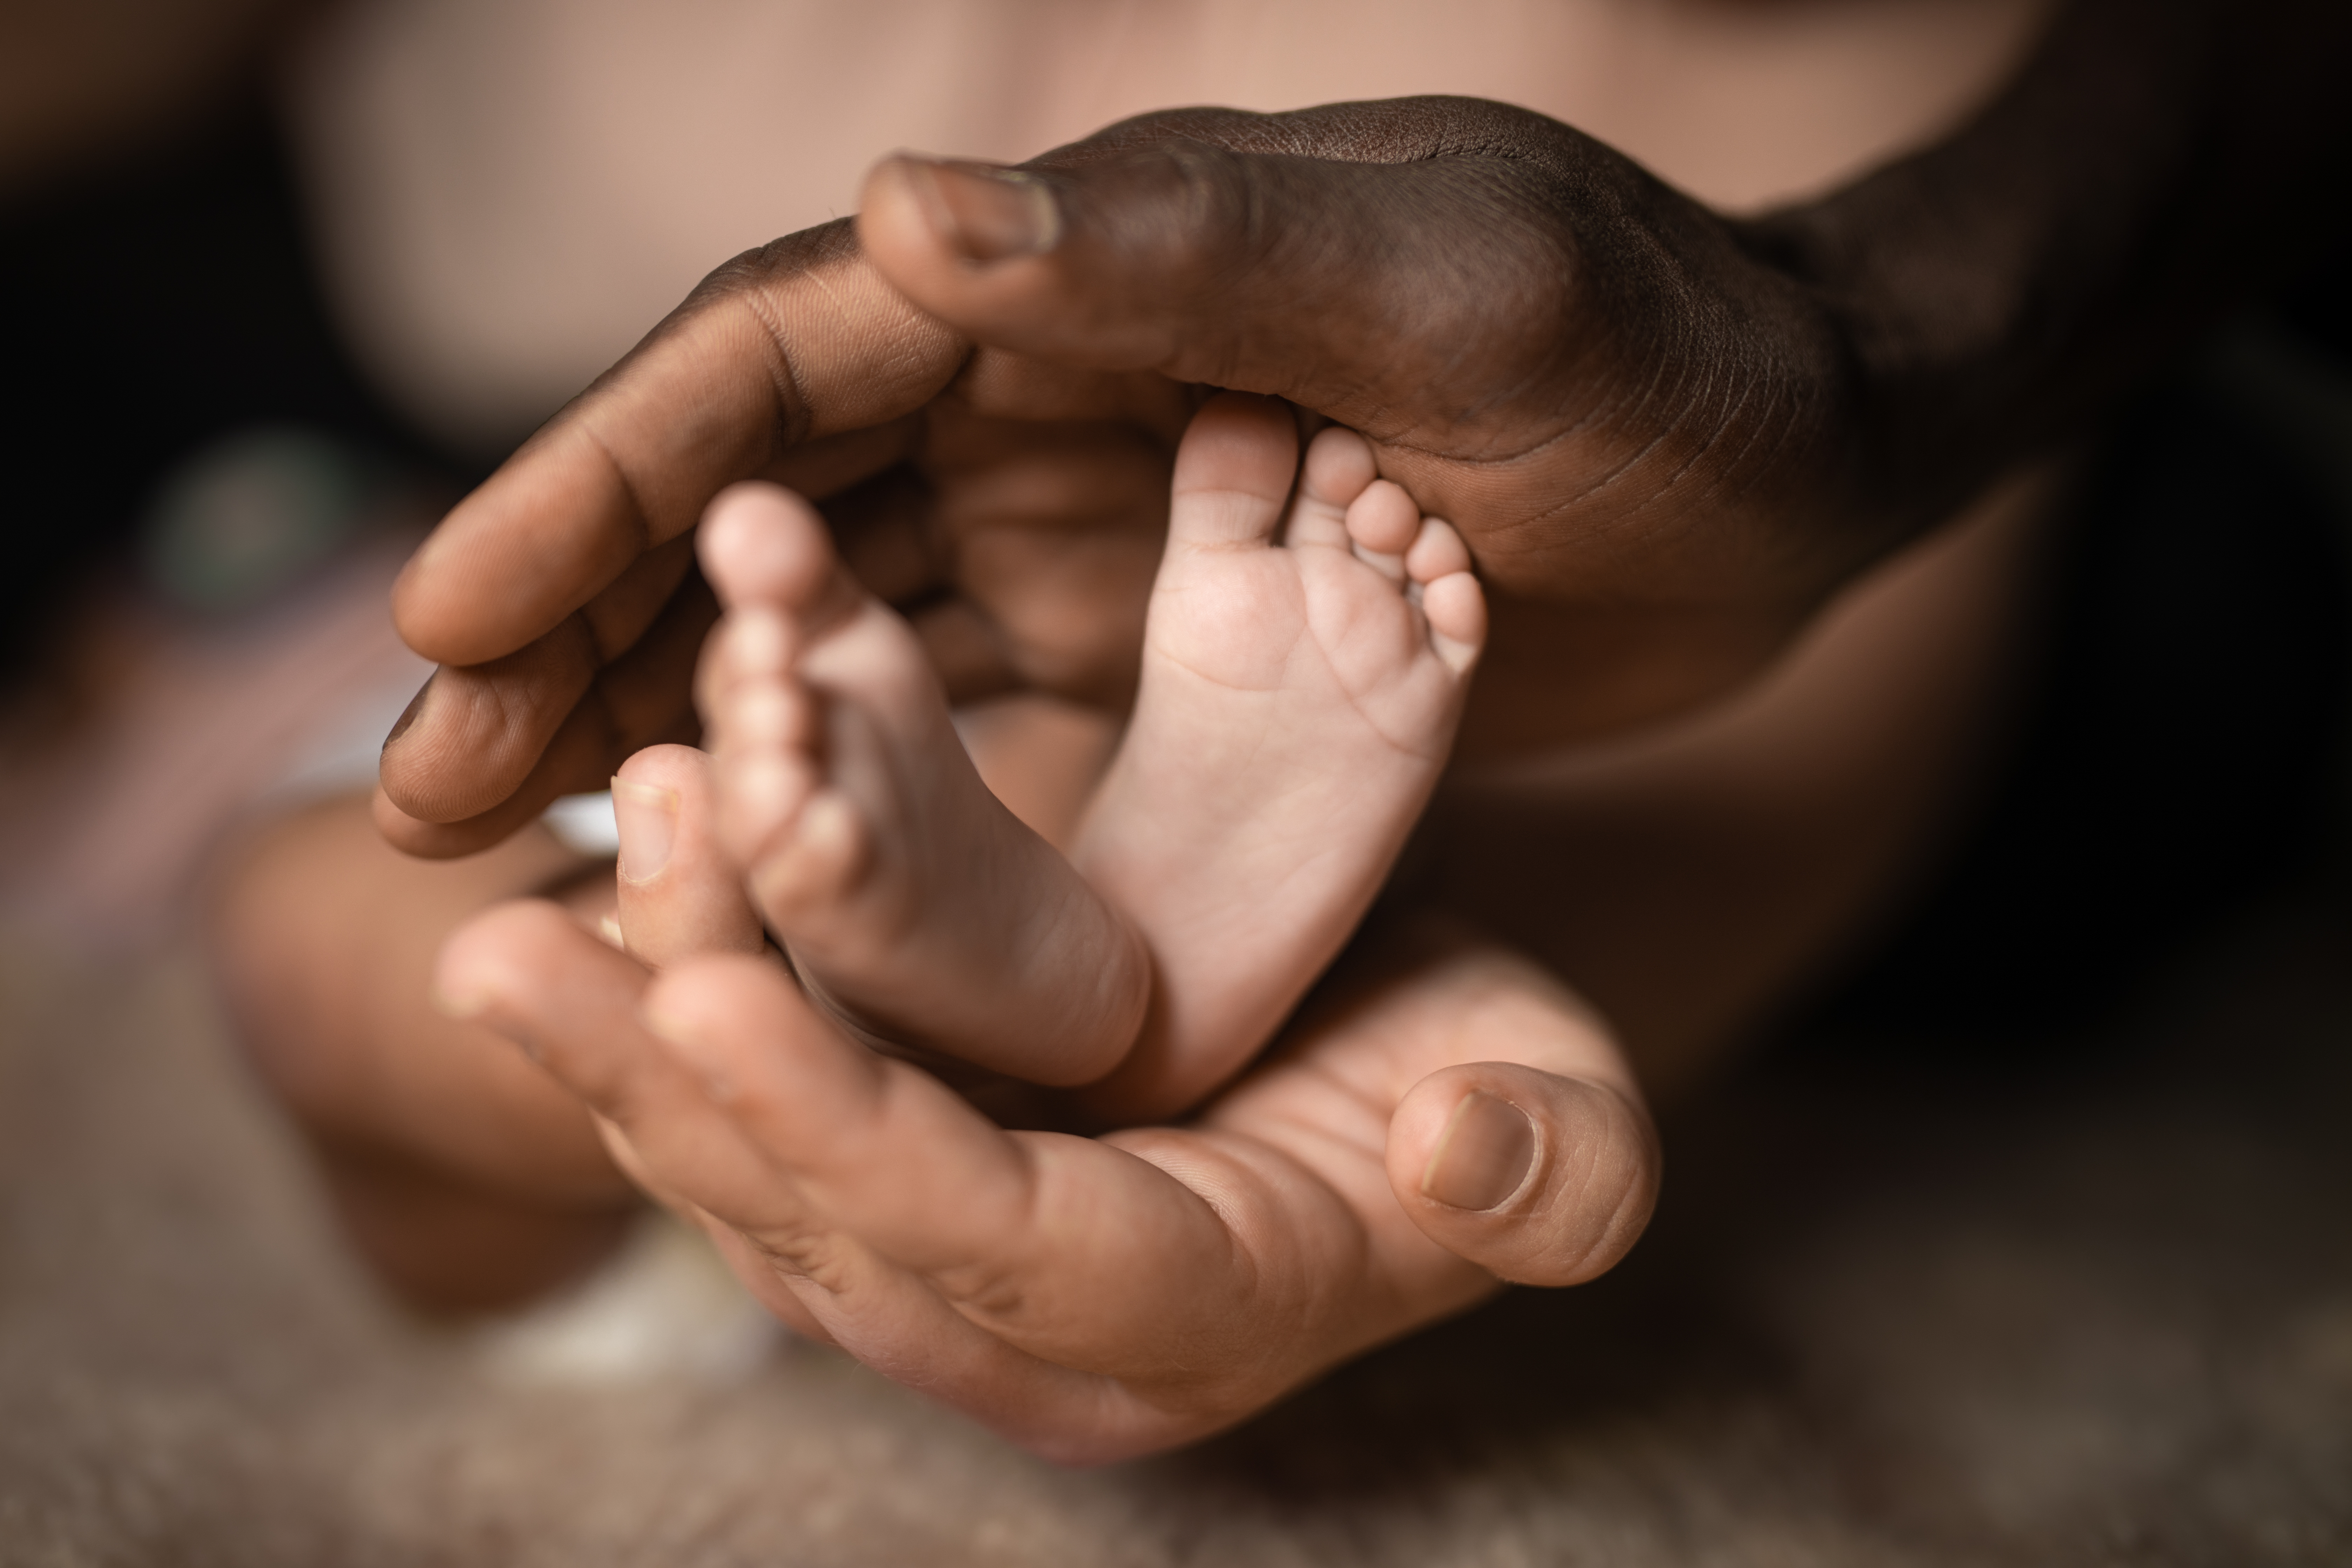 Parents hands holding their baby's feet